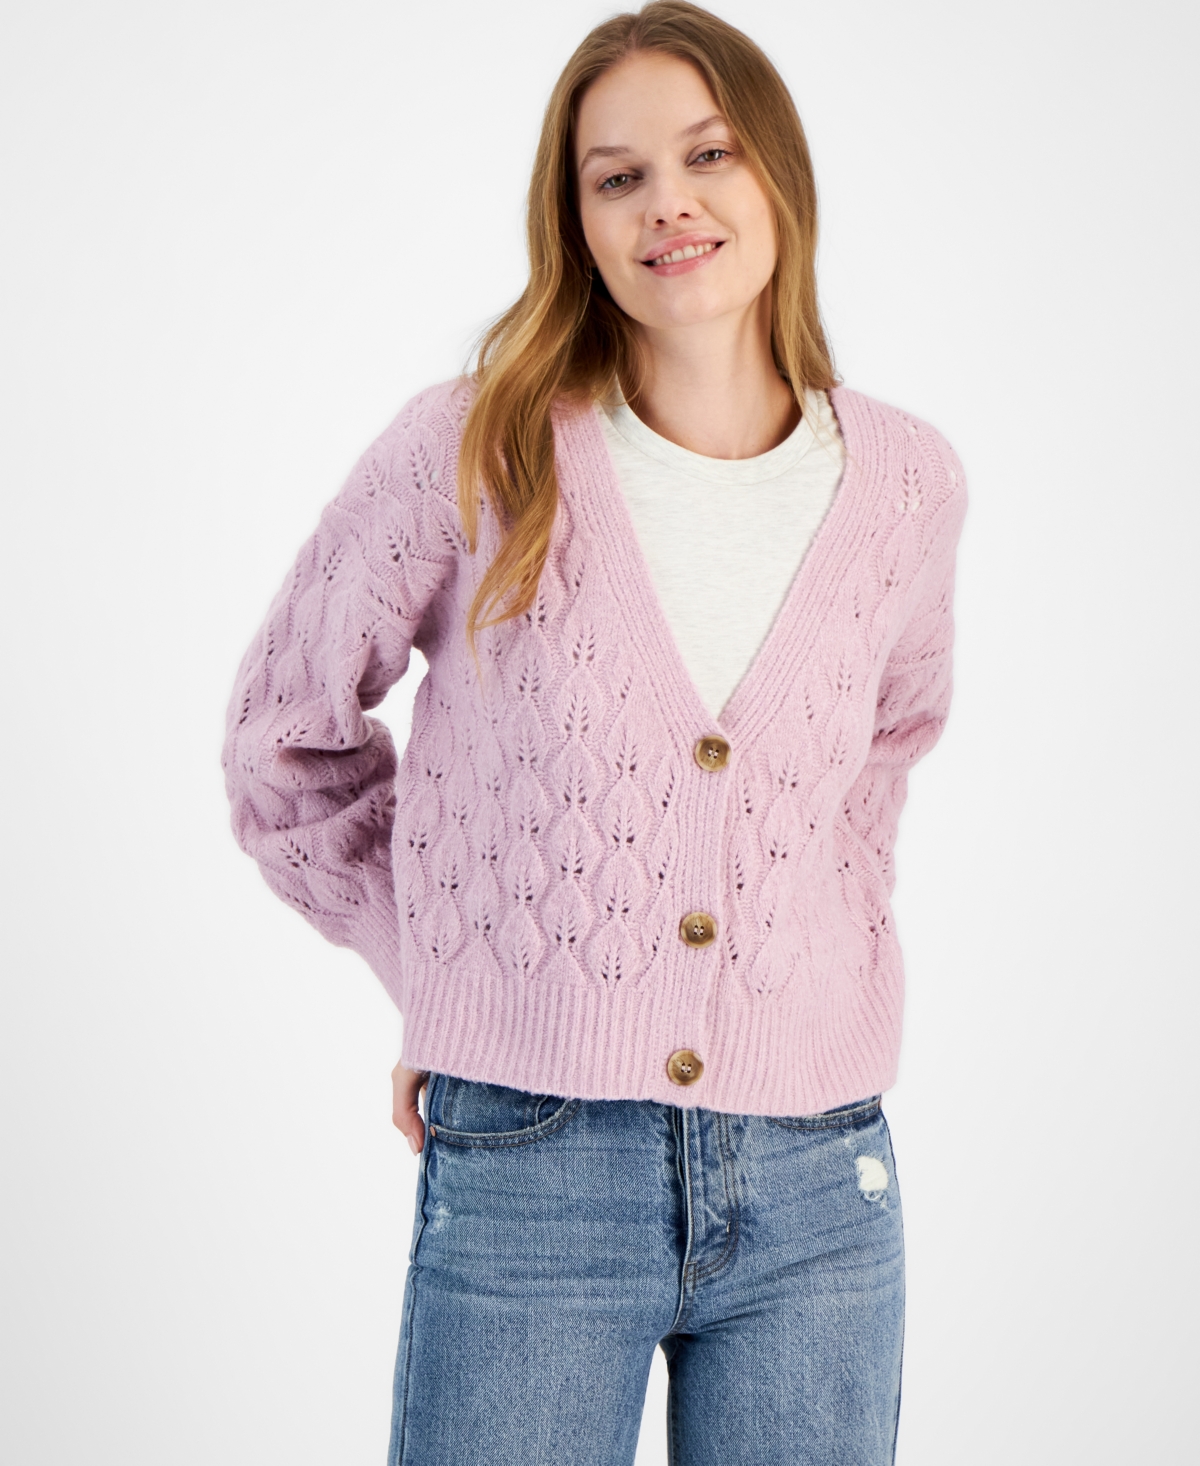 And Now This Women's Leaf-stitch Cardigan Sweater In Mauve Shadows